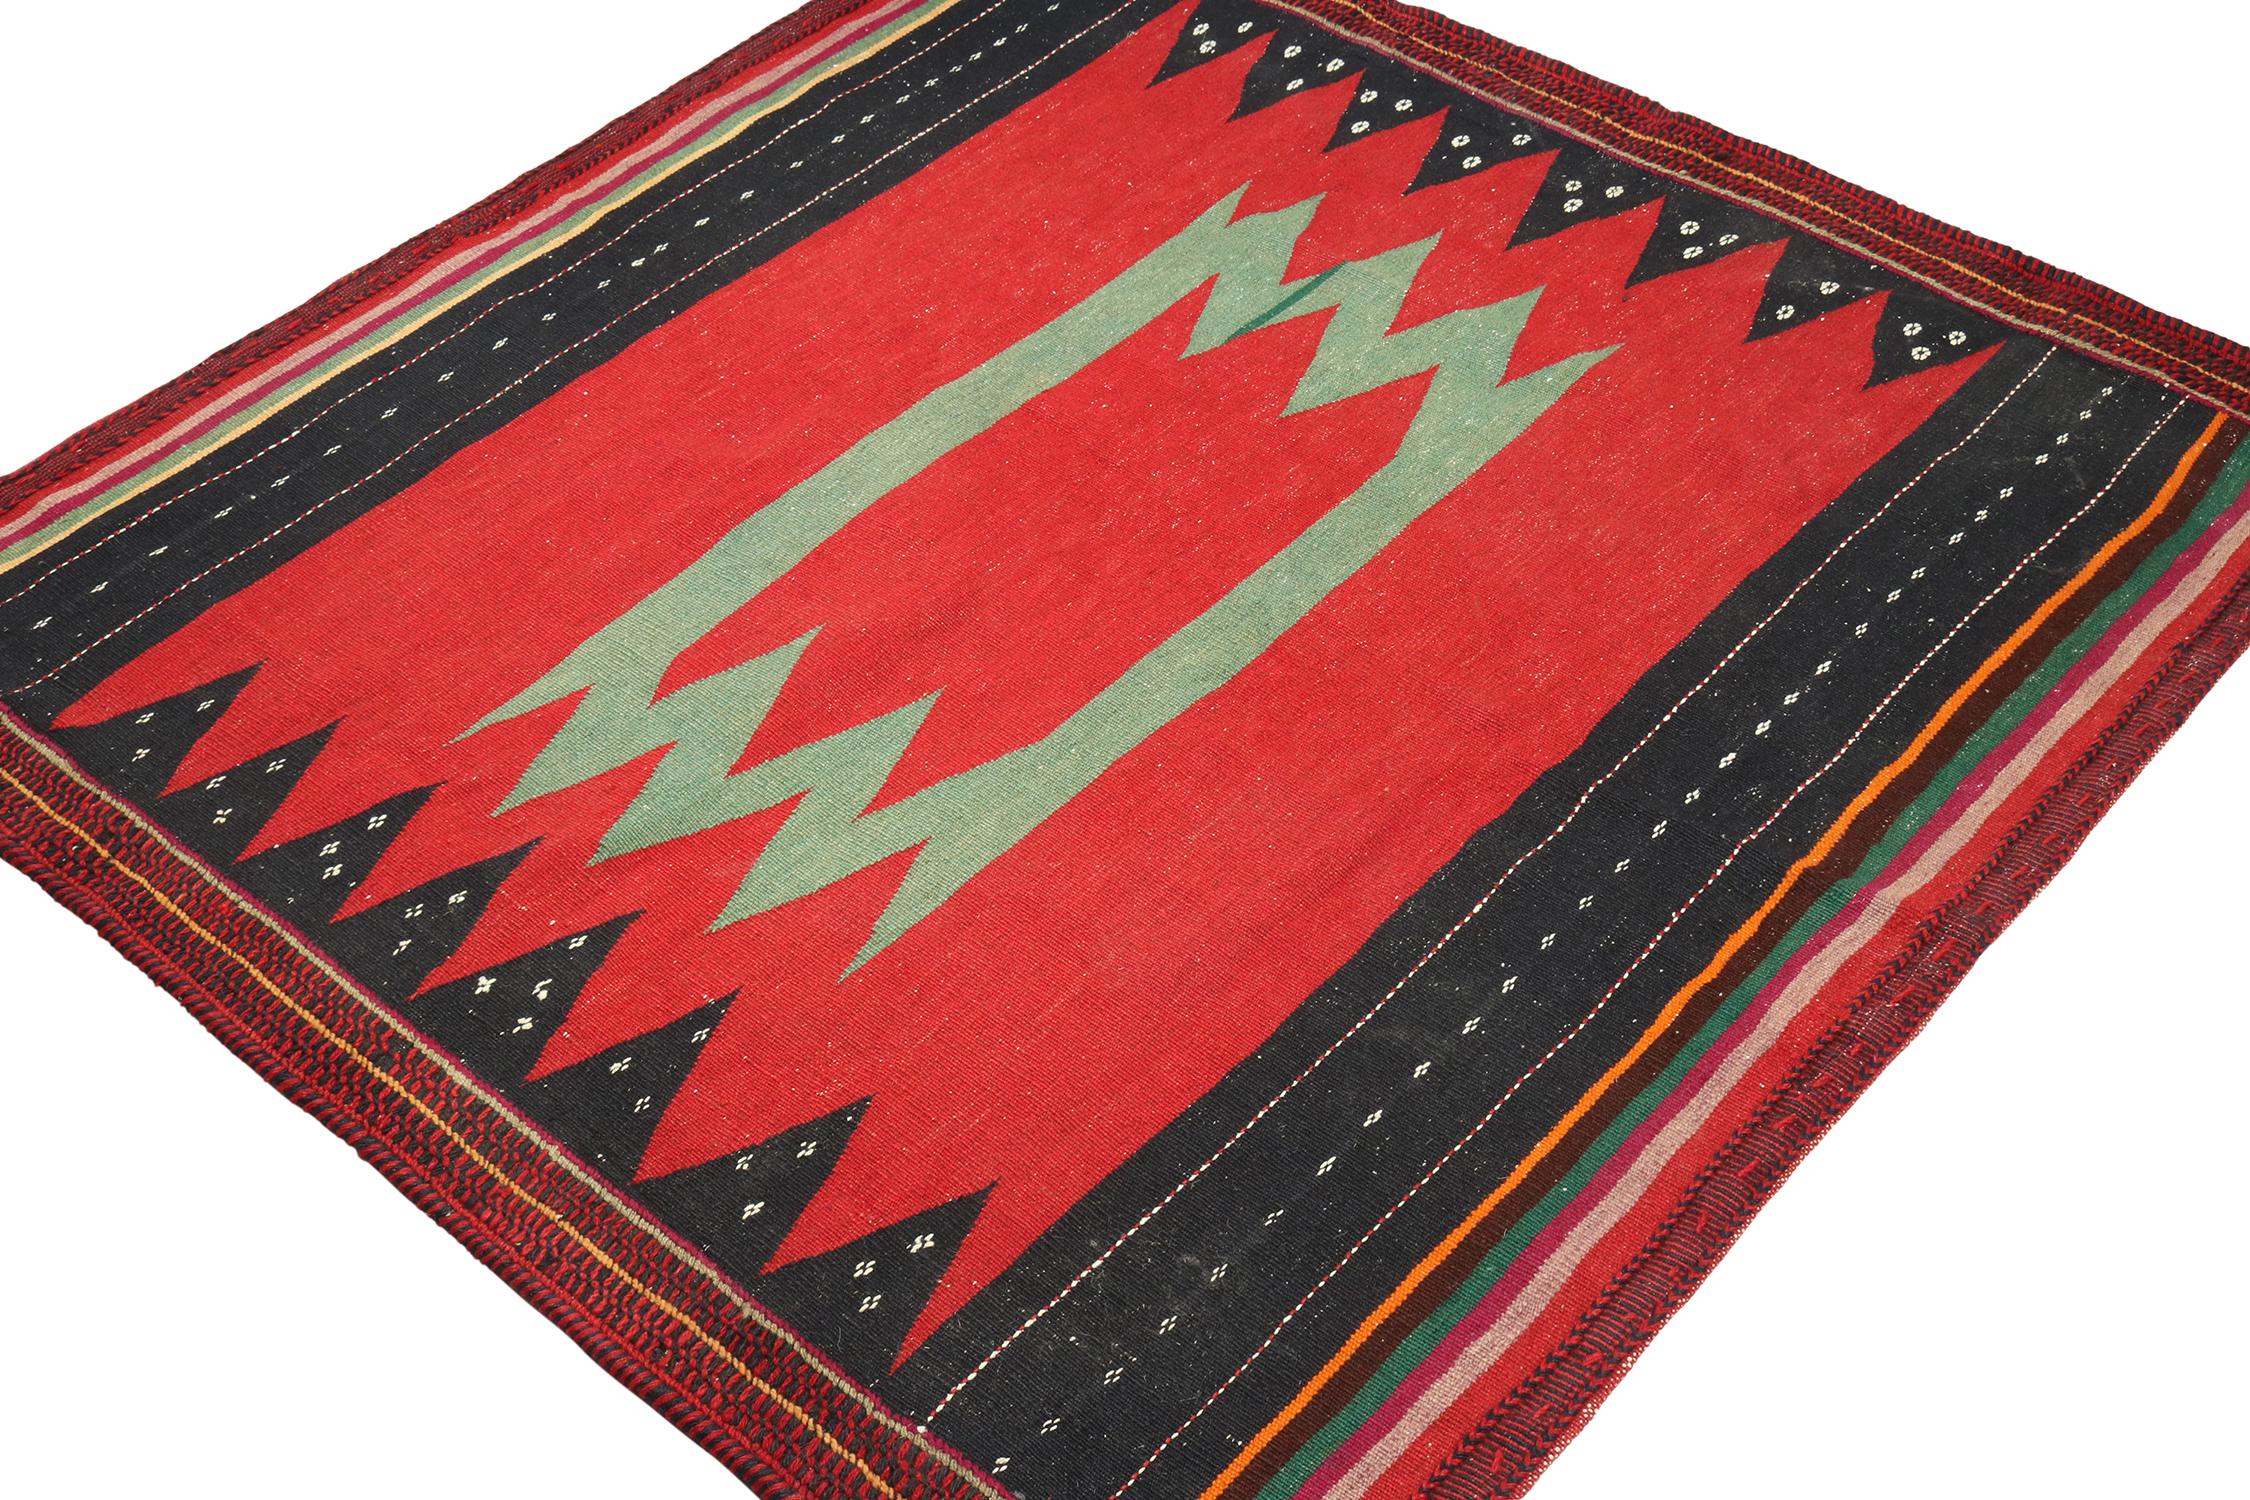 This vintage 4x4 square Persian kilim is a tribal Sofreh rug—handwoven in wool circa 1970-1980.

Further on the Design:

Sofreh Kilims like this piece are known for their minimalist patterns with vibrant colors and durable bodies. This particular